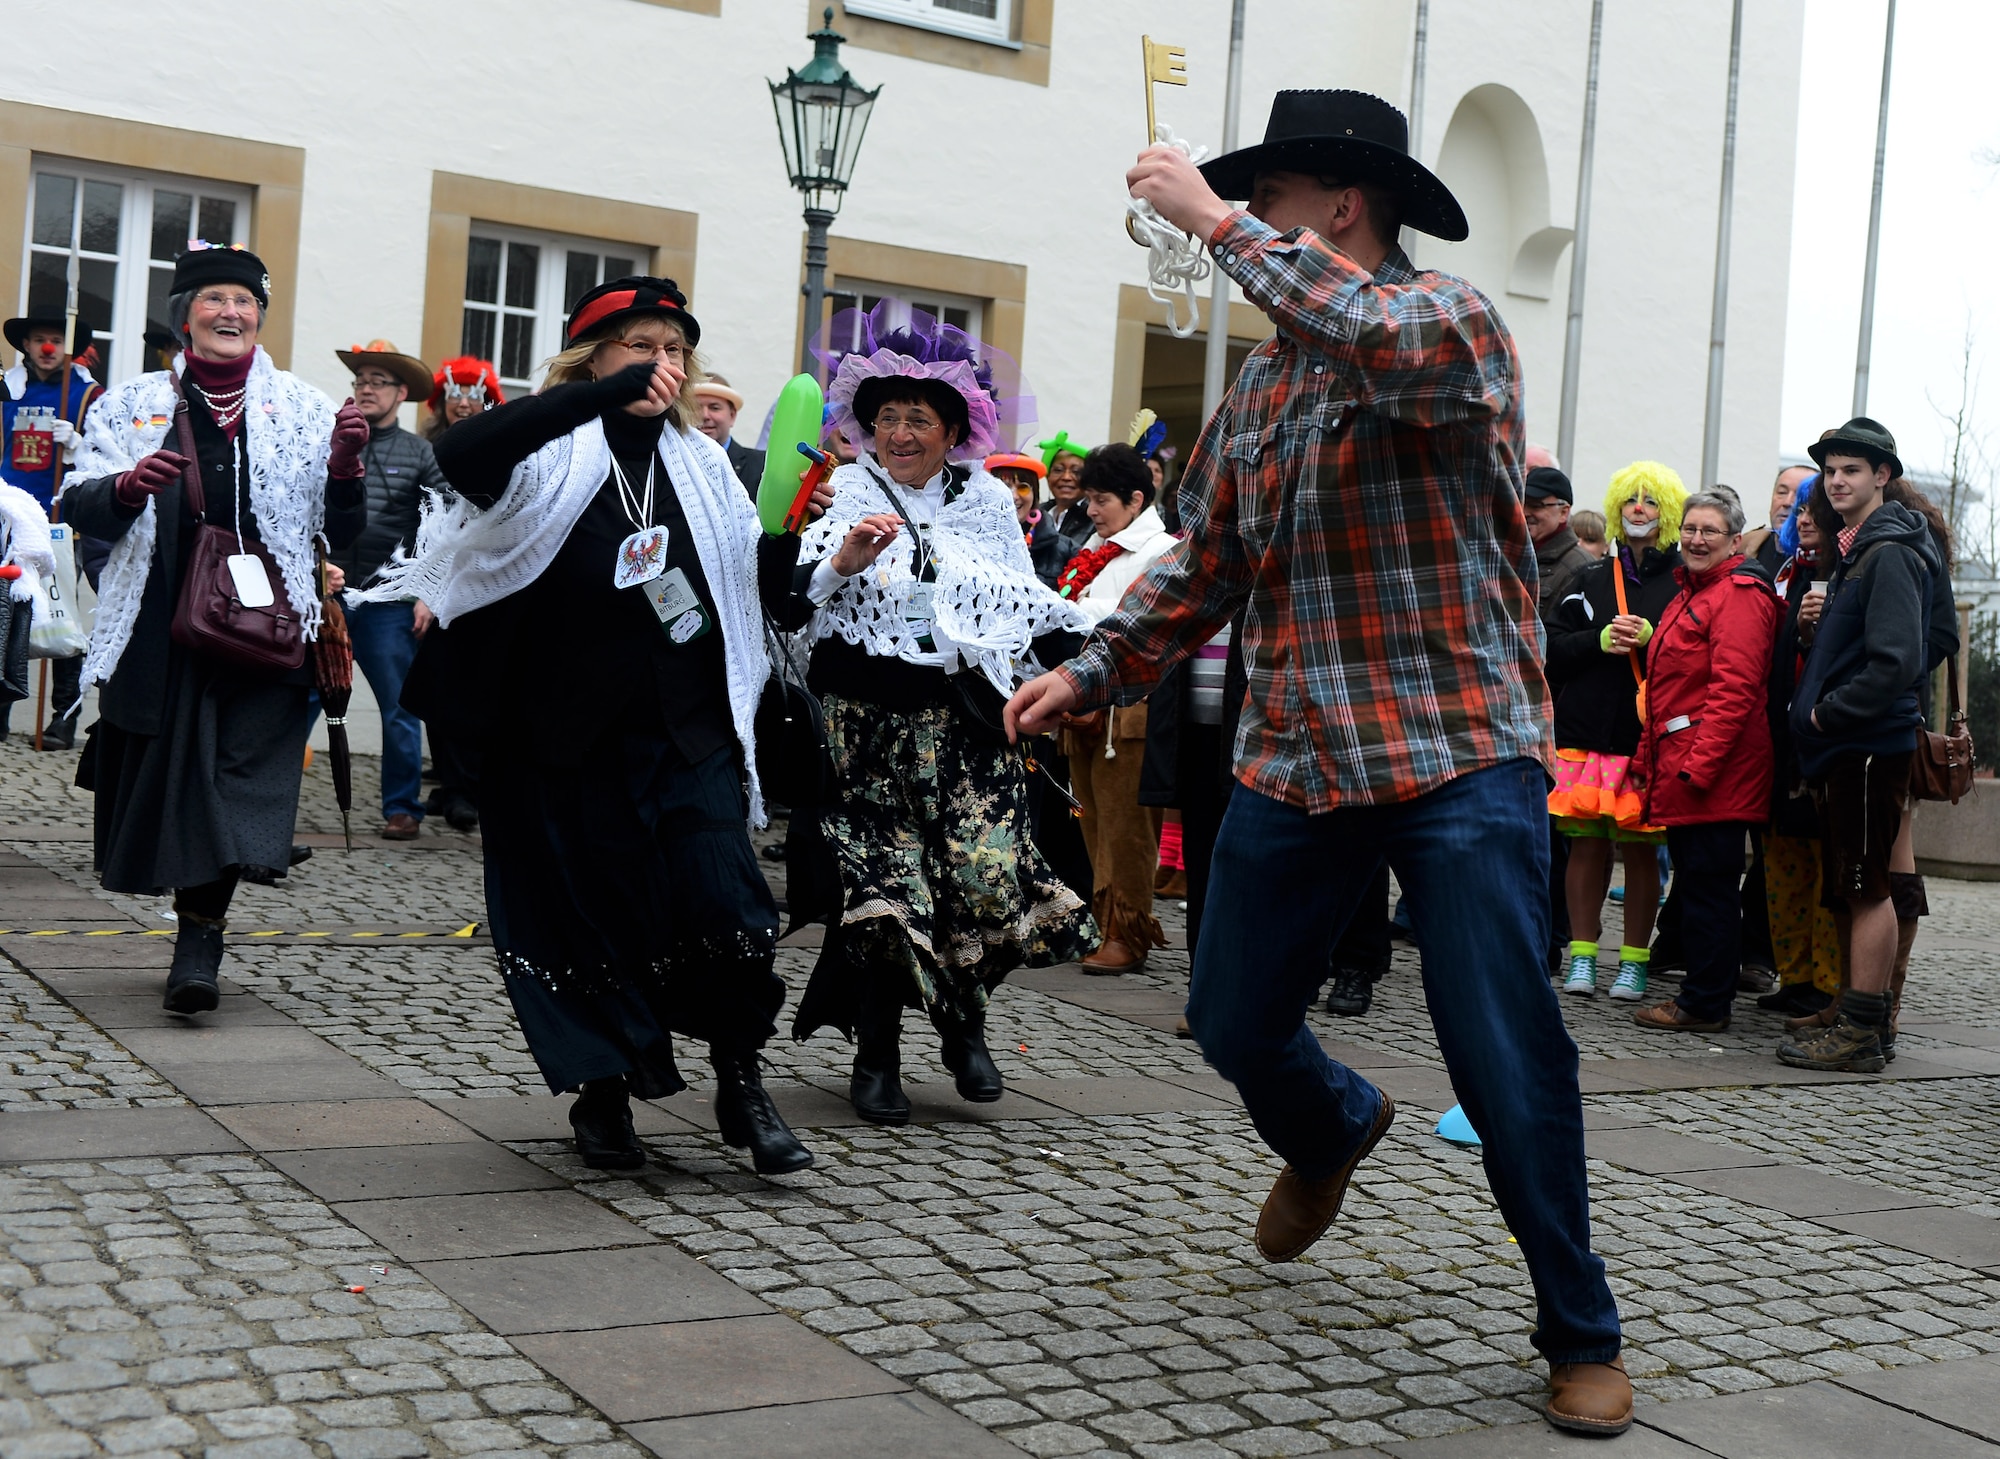 U.S. Air Force Senior Airman Dylan Nuckolls, a 52nd Fighter Wing Public Affairs photojournalist, runs with the symbolic key to the city as he is chased by female citizens of Bitburg during the 2015 Storming of the Rathaus Fasching event in Bitburg, Germany, Feb. 12, 2015. The women captured the key, symbolizing they had taken control of the city as part of the holiday’s tradition. (U.S. Air Force photo by Airman 1st Class Luke Kitterman/Released)
 
